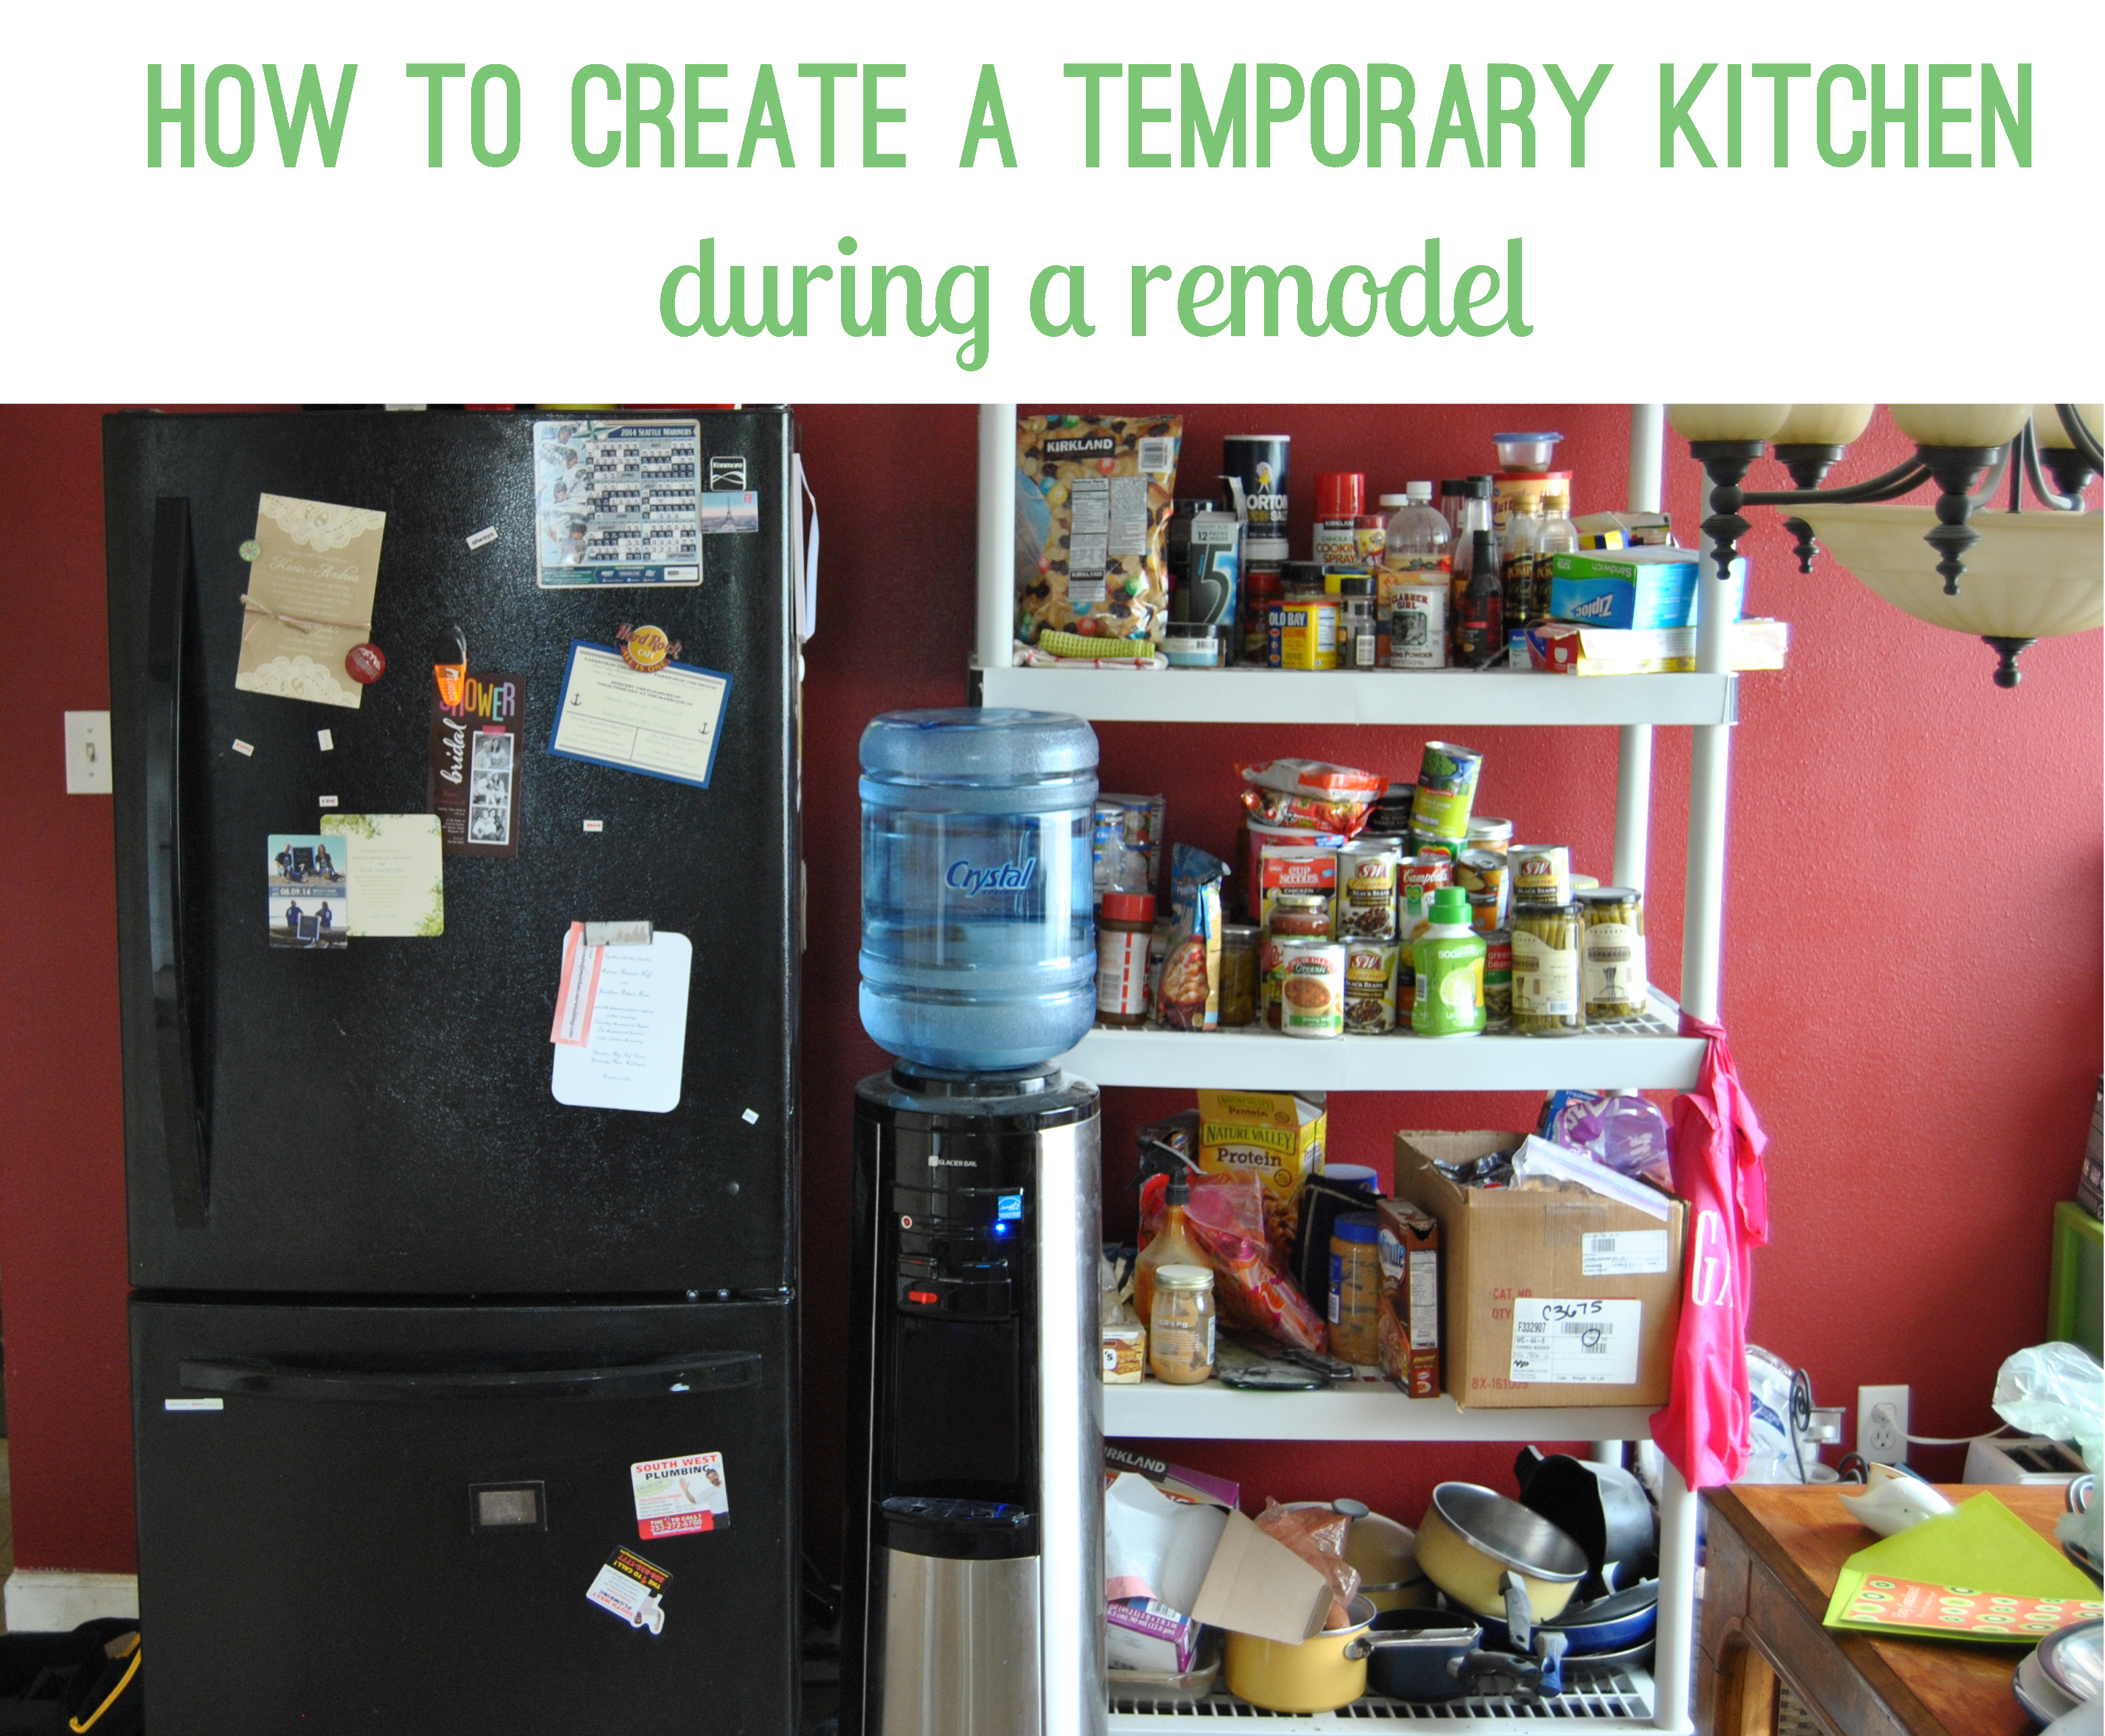 how to create a temporary kitchen during remodel. storage, crock pot, fridge, microwave | bexbernard.com